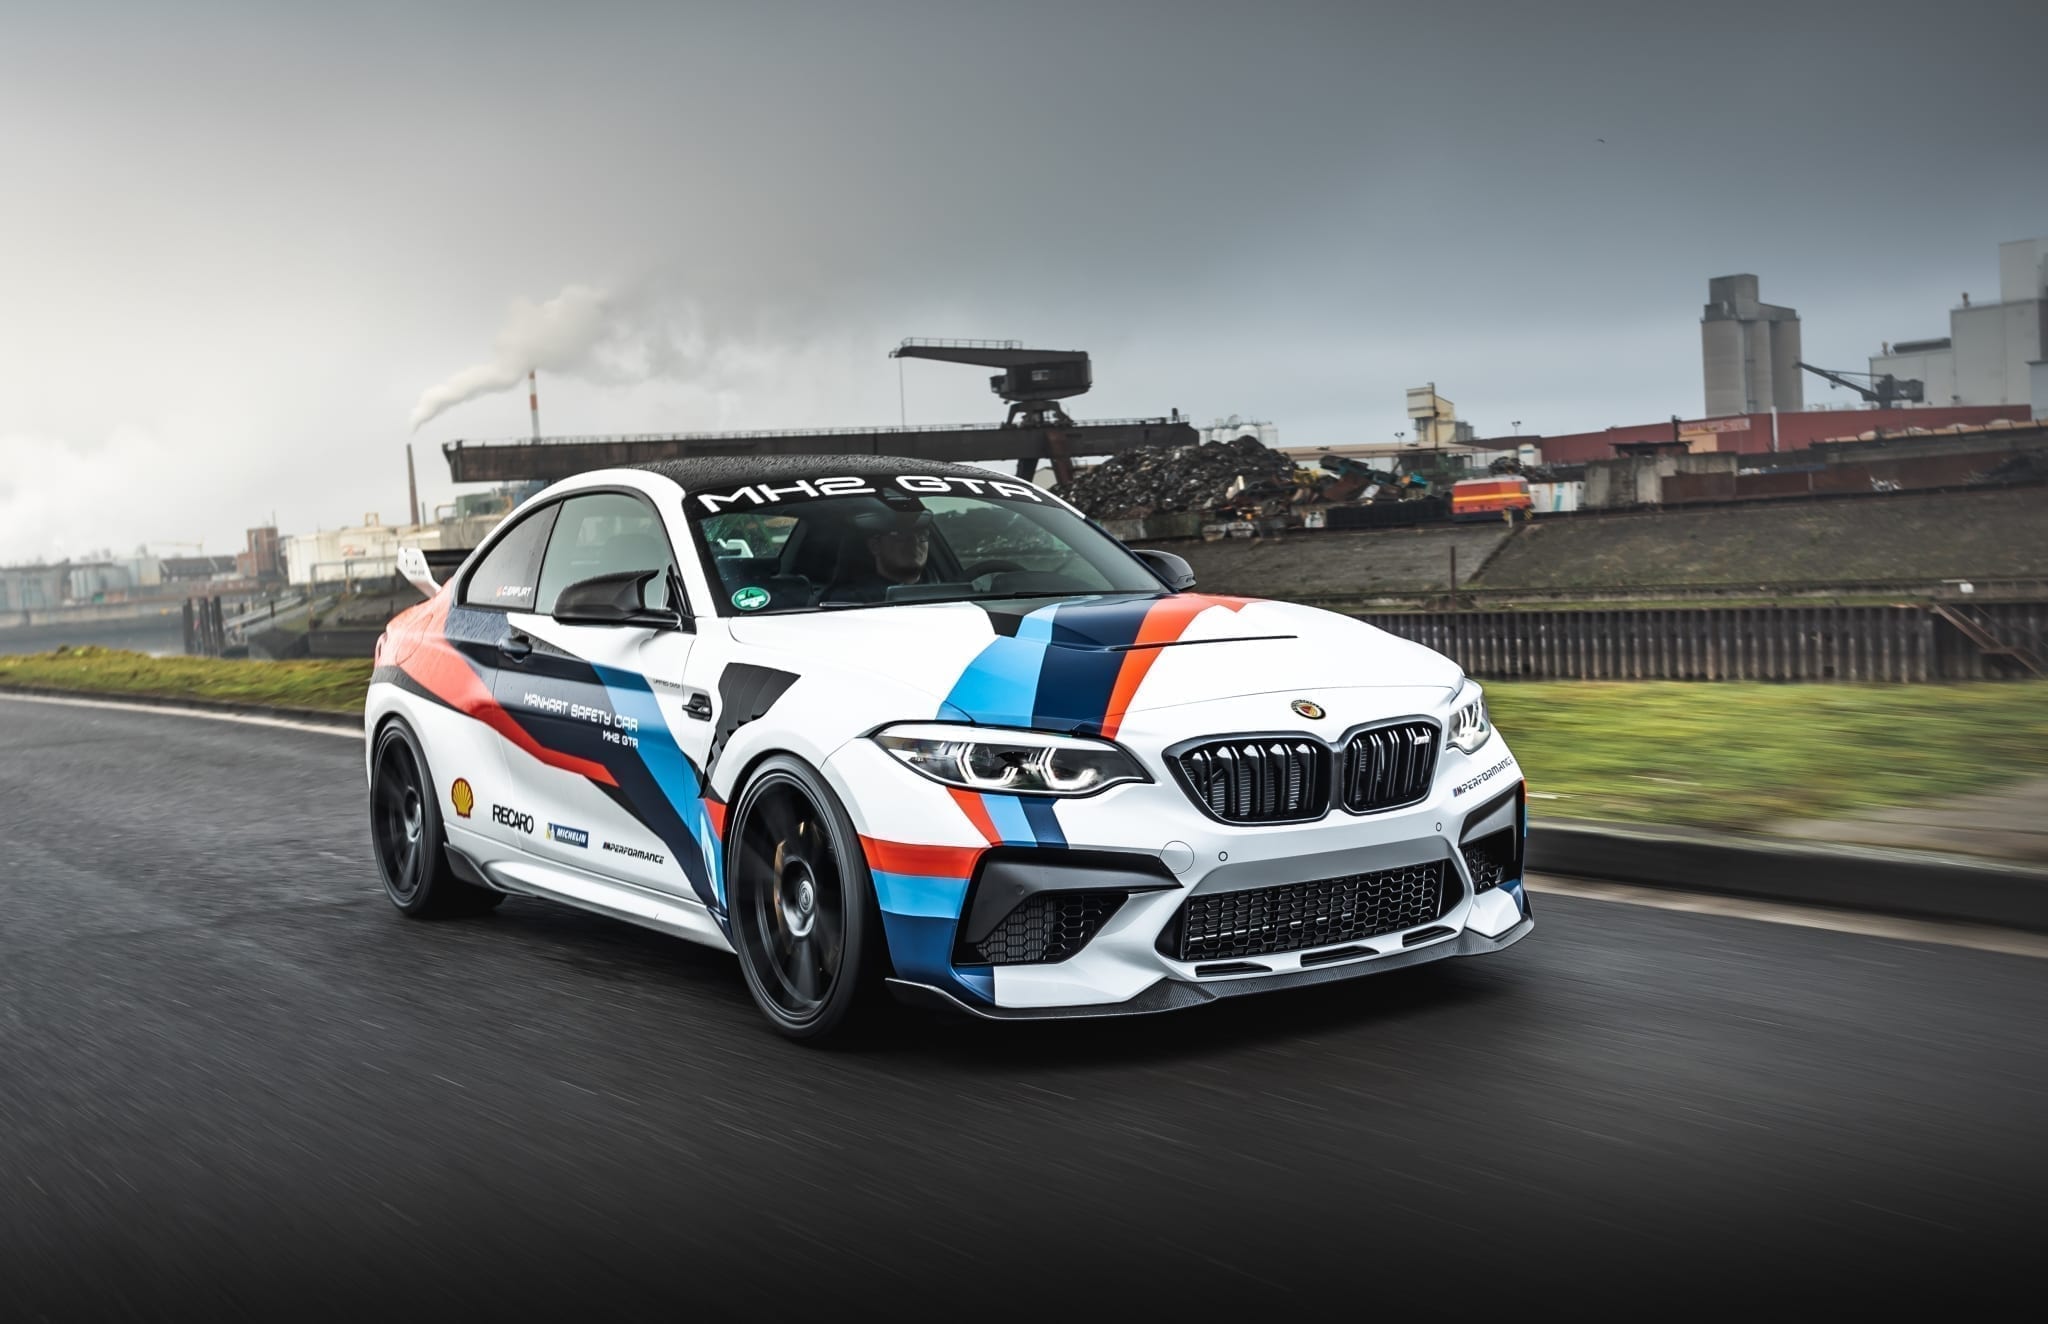 Manhart Mh2 Gtr Track Ready Pack Takes The Bmw M2 Cs Exactly Where It